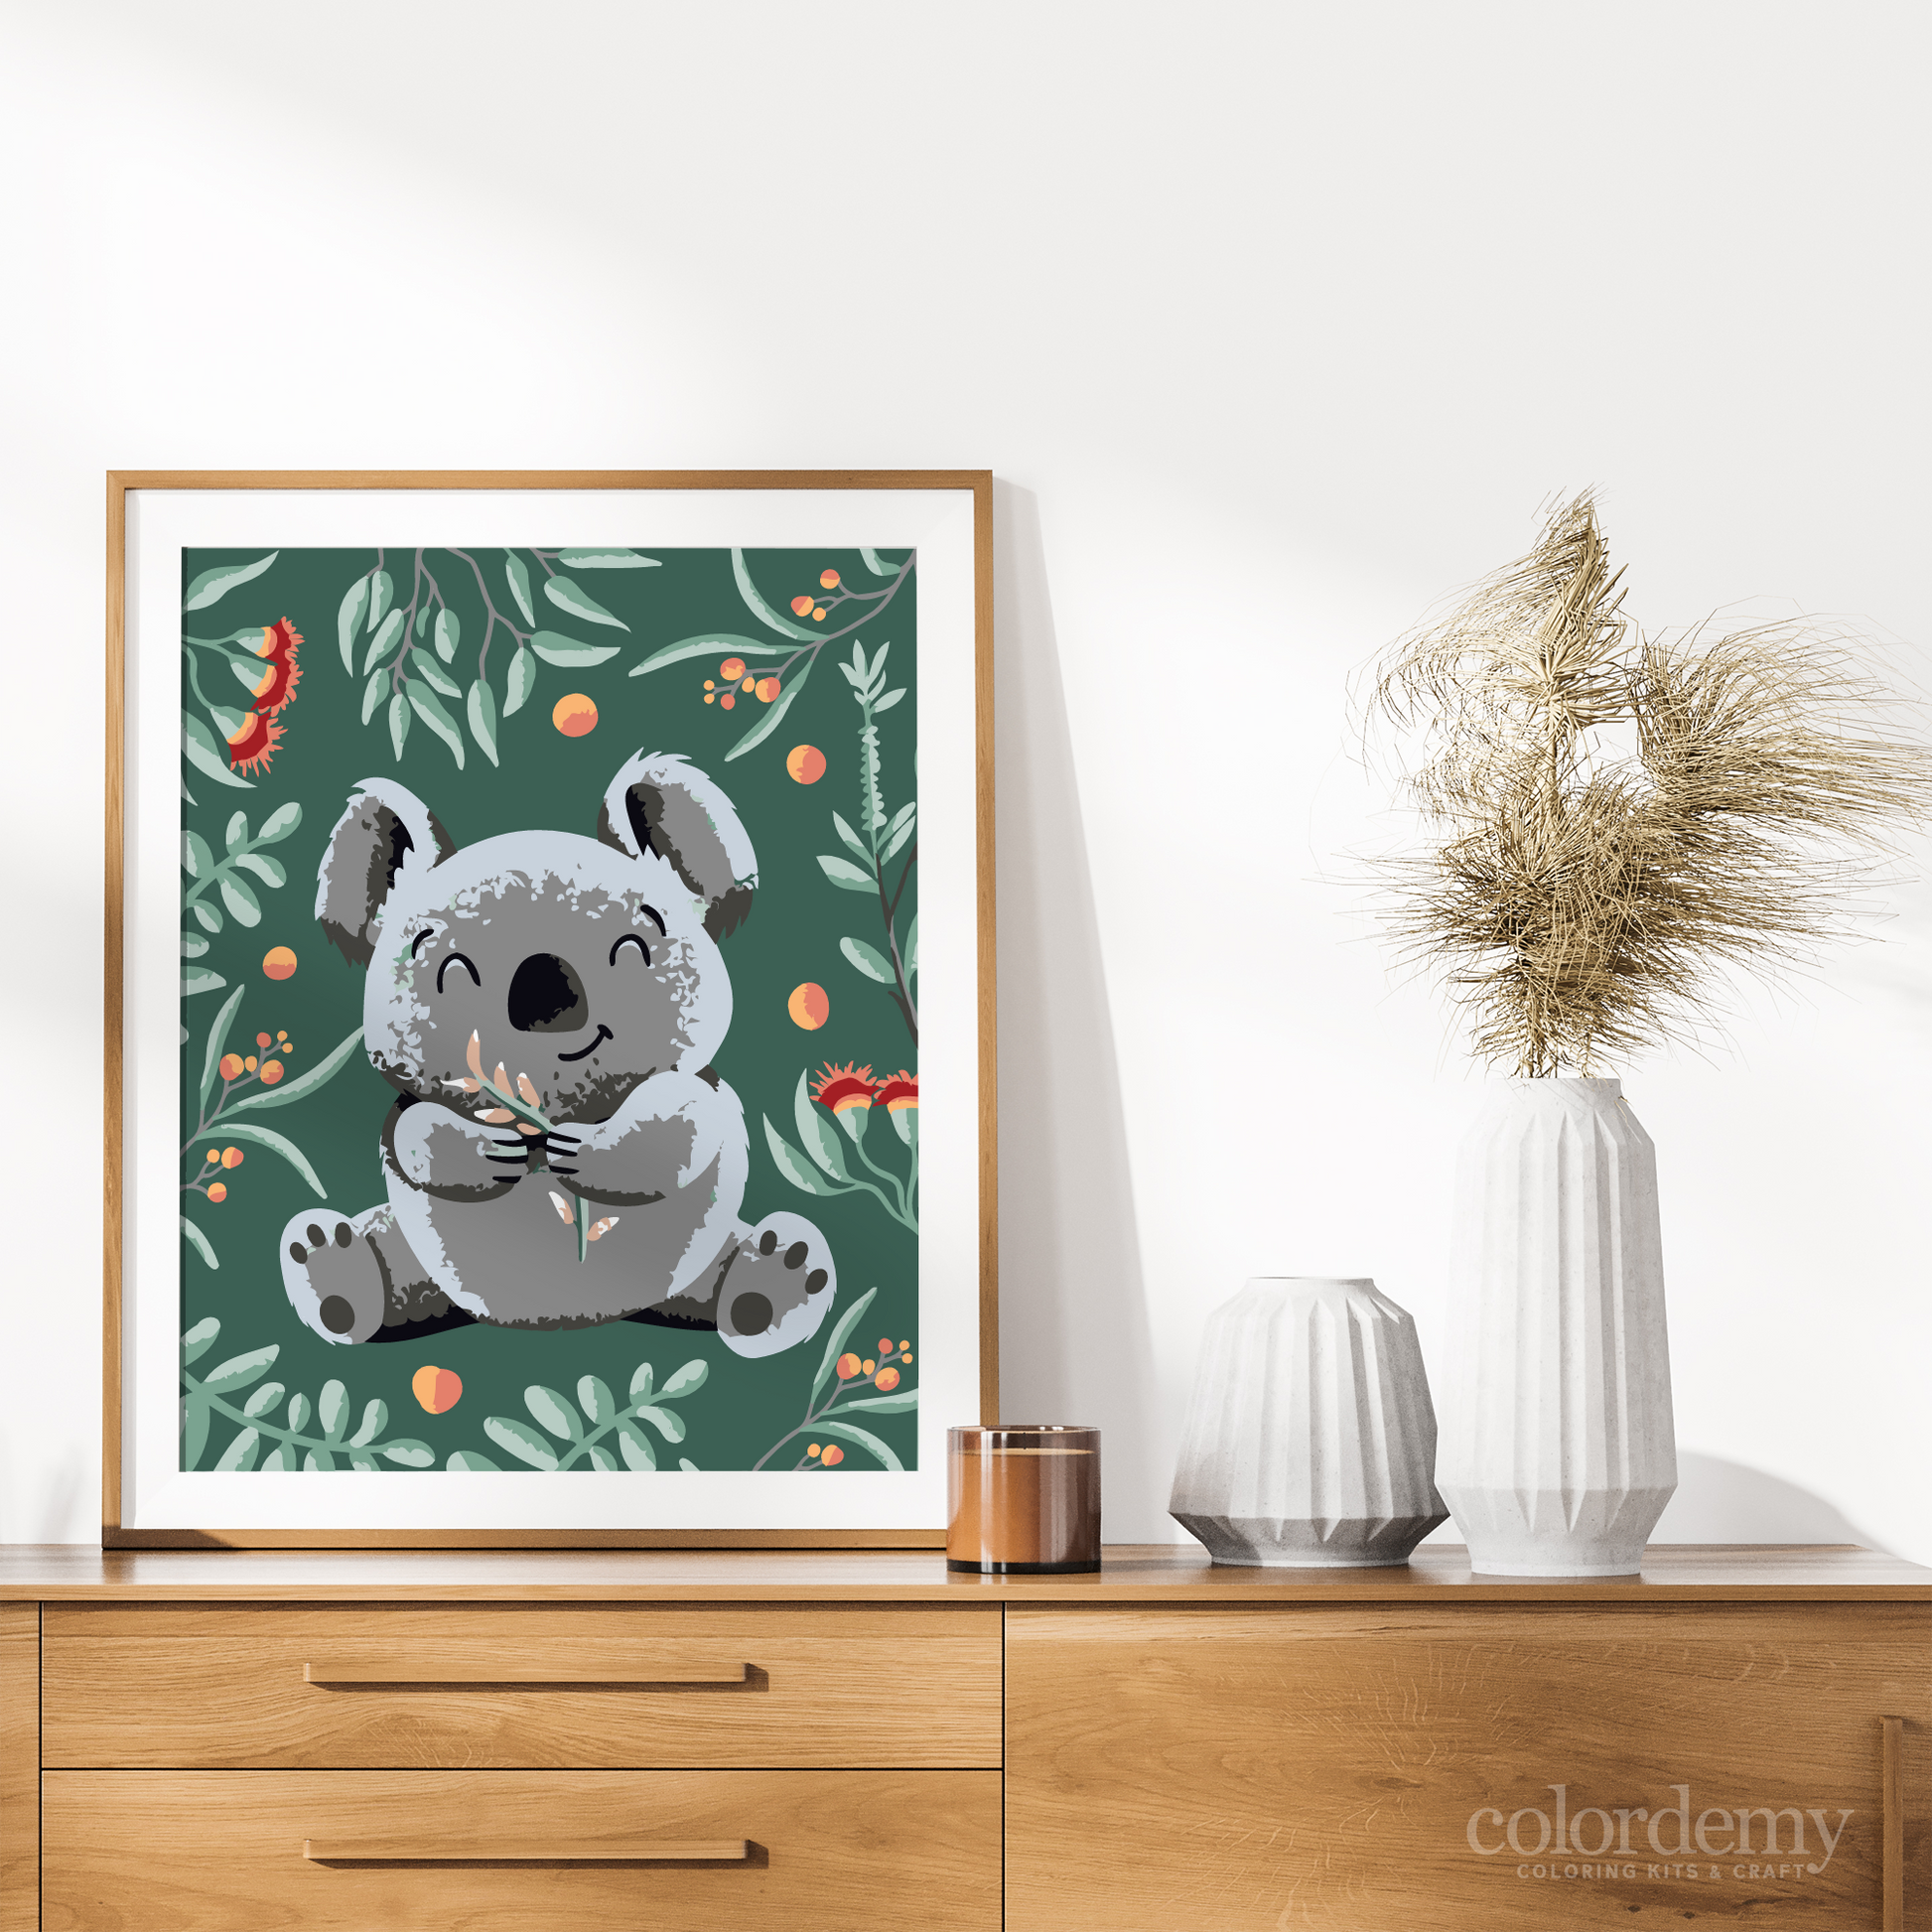 40x50cm Paint by Numbers kit: Koala Canvas: Abstract Style